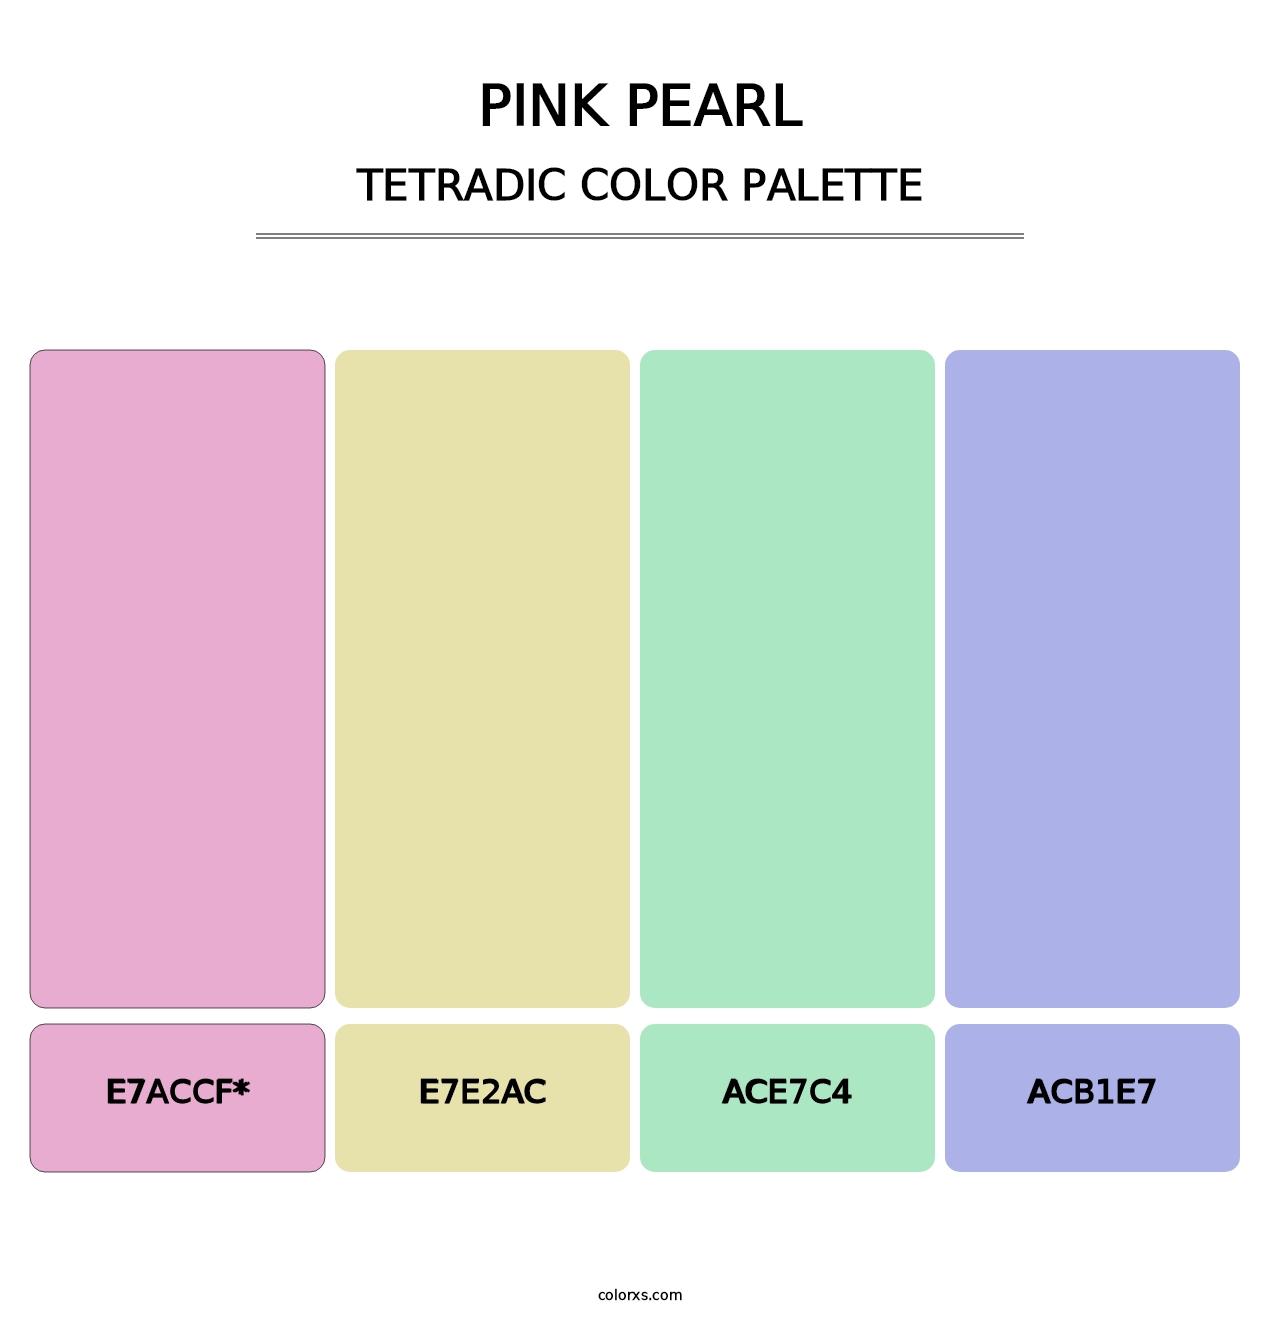 Pink Pearl - Tetradic Color Palette